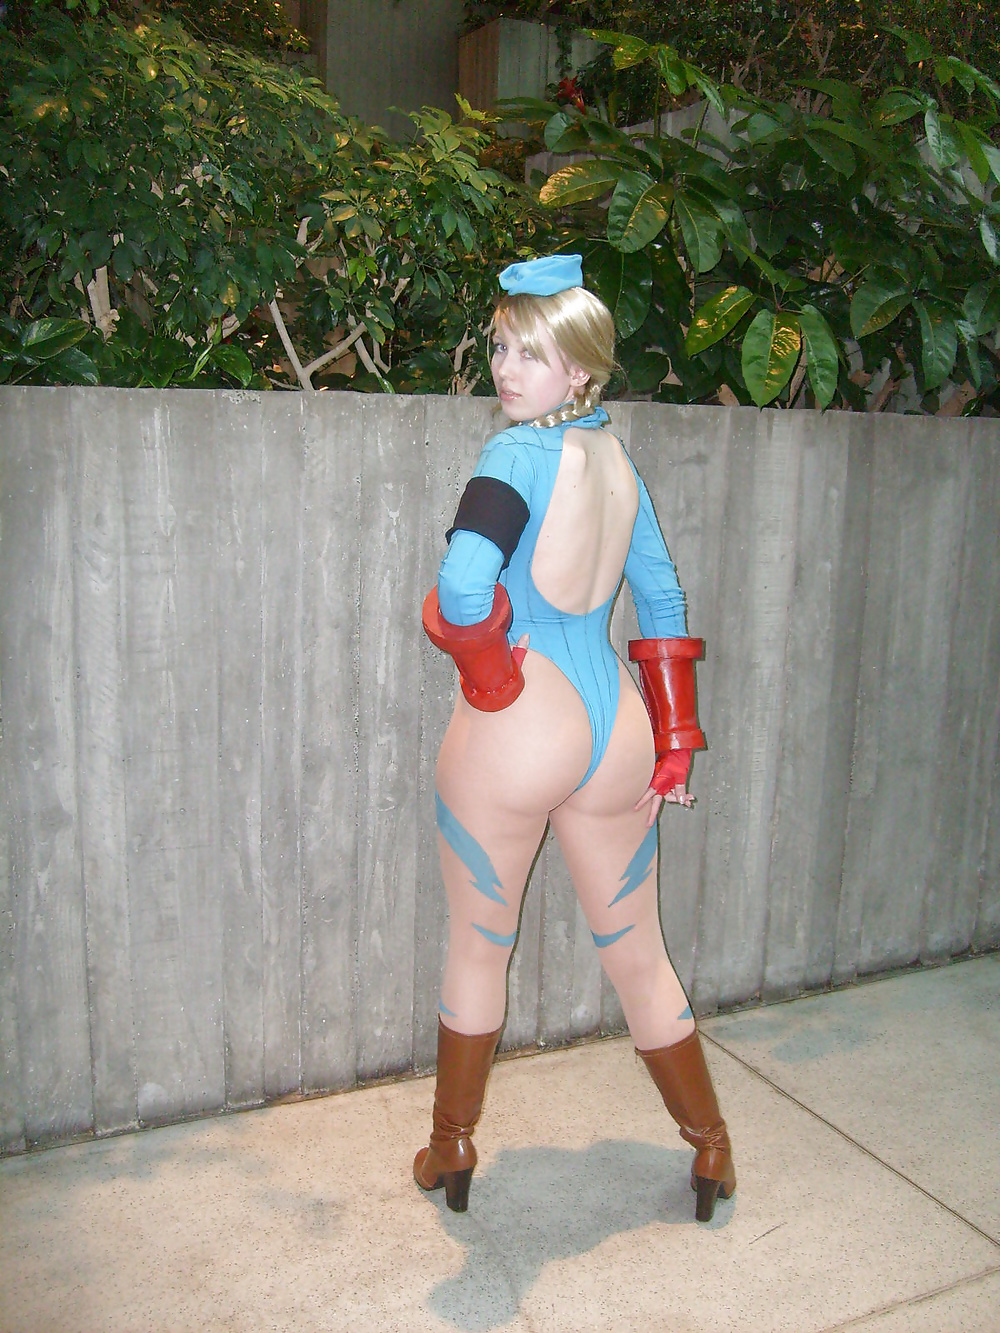 Cosplay # 6: Ikuy Comme Cammy De Street Fighter #24119506